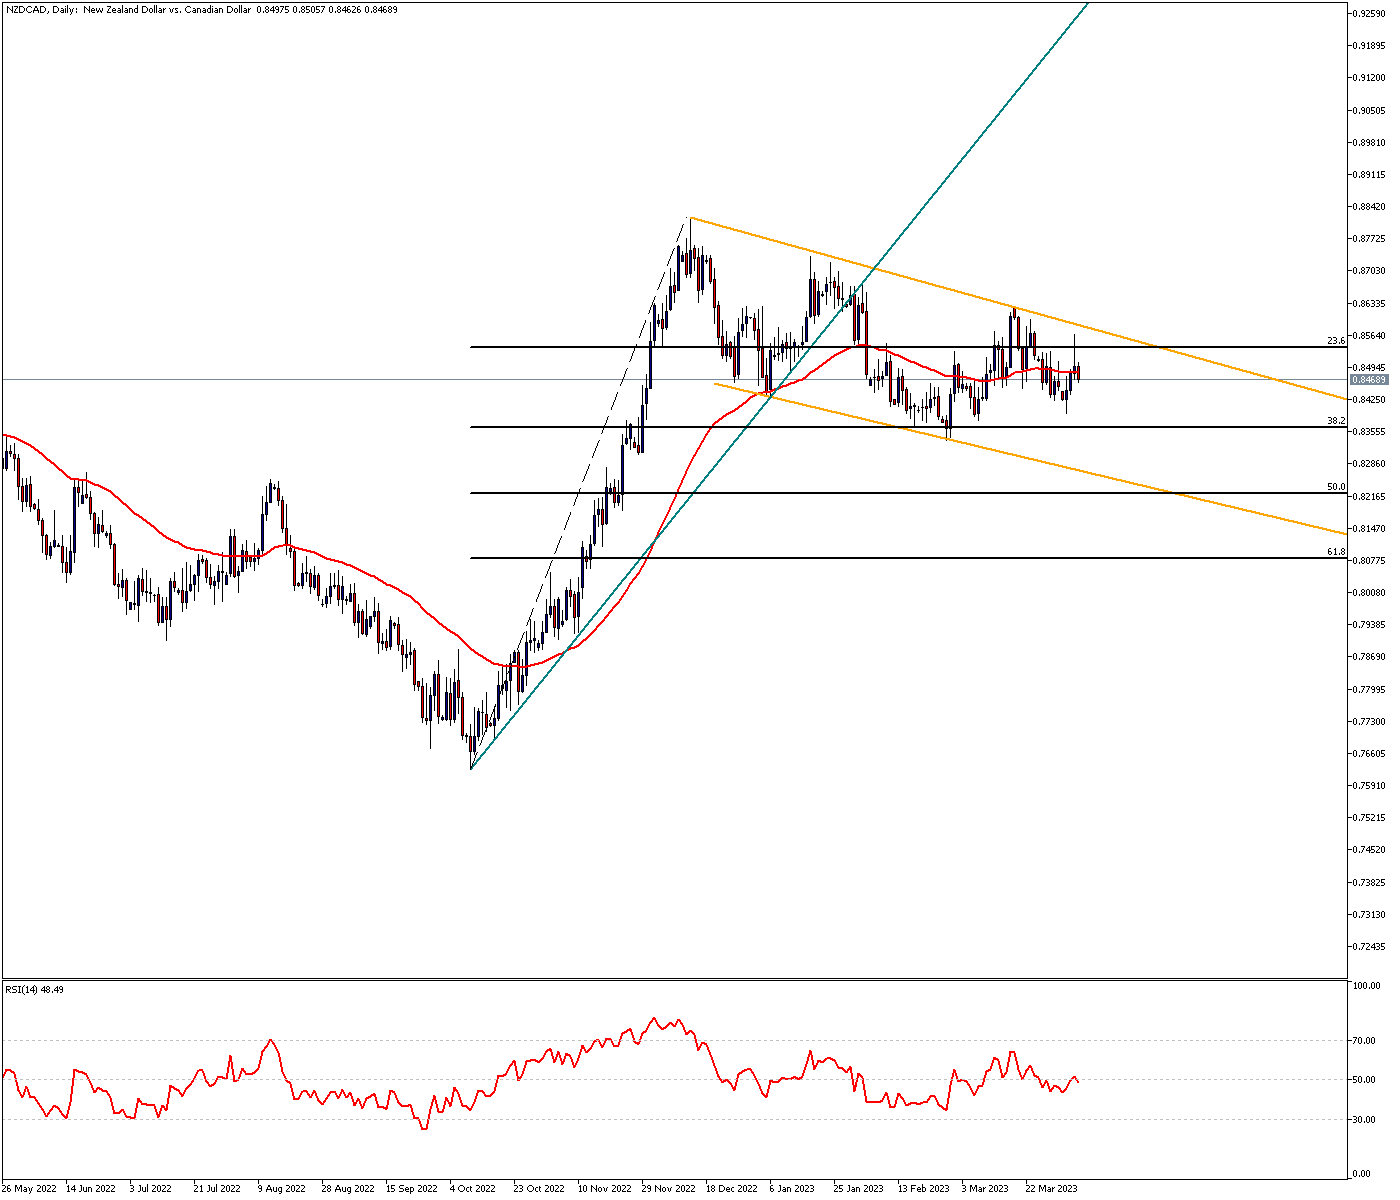 NZDCAD Fluctuates in Correction Channel